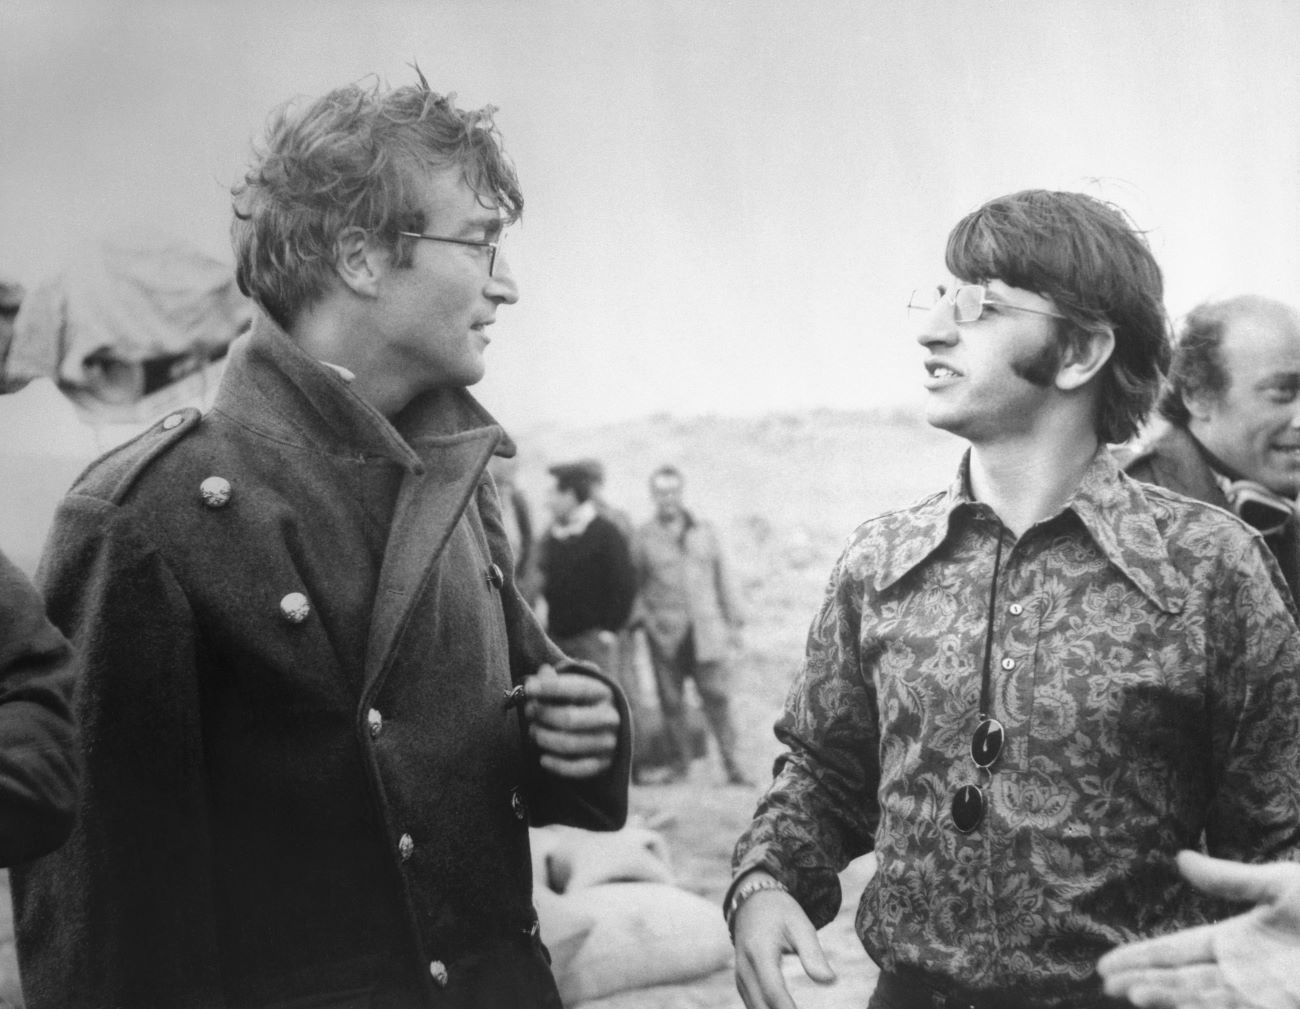 A black and white picture of John Lennon and Ringo Starr talking on an outdoor movie set.